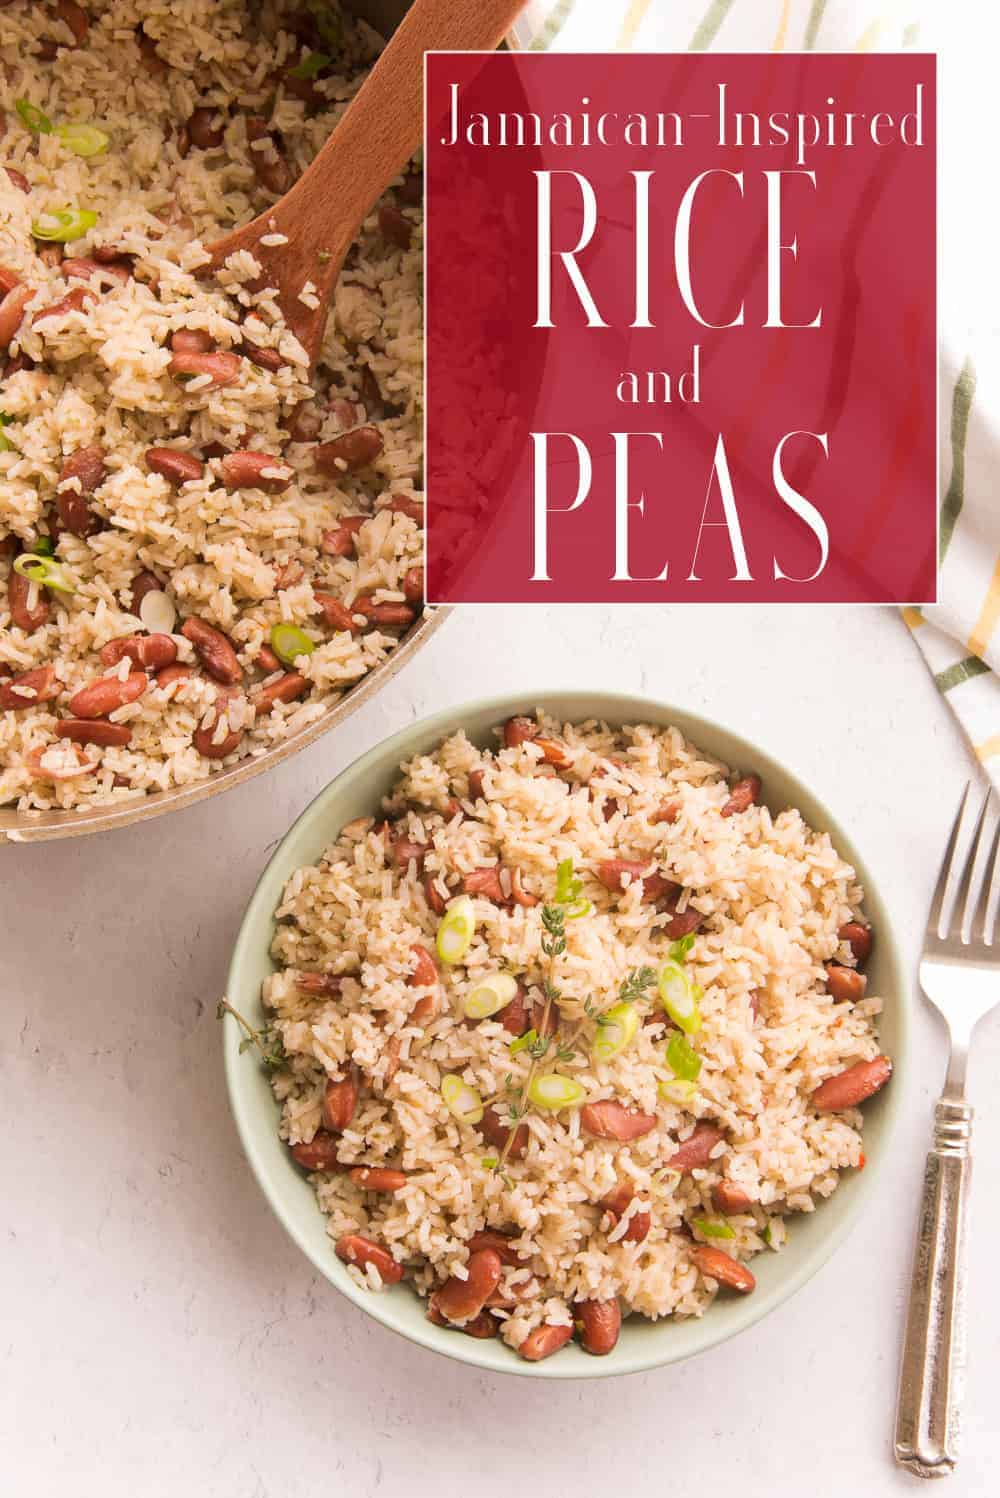 Jamaican-Inspired Rice and Peas has a mild coconut flavor from fresh coconut milk and heat from a scotch bonnet pepper. It's flavorful, easy to make, and vegan, so it's perfect for all types of diners. Use dried or canned beans to make this tasty recipe. #riceandpeas #arrozconhabichuelas #riceandbeans #jamaican #Caribbean #AfroCaribbean #AfroLatina #Hispanic #Caribbeanrecipes #sidedishrecipes #sidedish #vegan #vegetarian  via @ediblesense